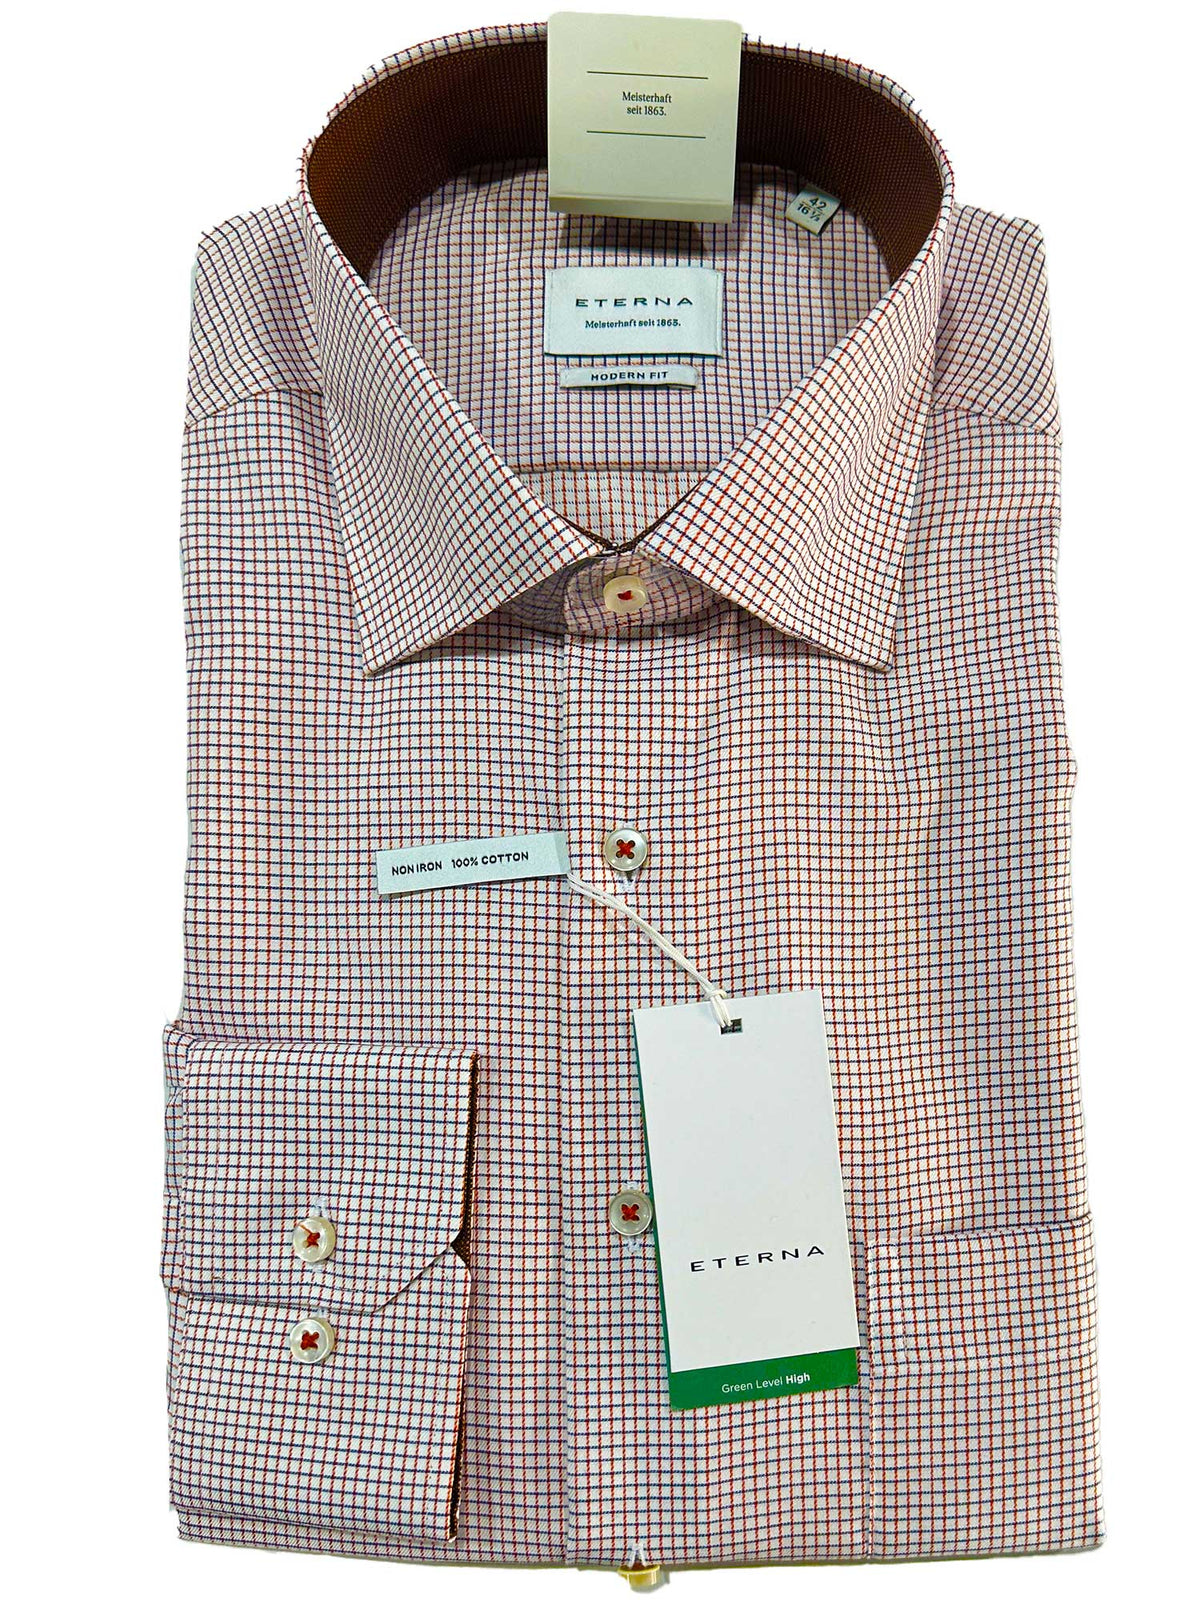 4065M  https://harrysformenswear.com.au/products/4002-16-copy  Eterna Shirts made with super fine cotton. ETERNA produces a wide range of high quality non-iron shirts and blouses. The extensive range includes: Comfort Fit , Modern Fit, Premium, Slim Fit and Super Slim Shirts. The ETERNA collection is based on 100 percent “ fine cotton”, a high-value and non-iron cotton. The fabric…